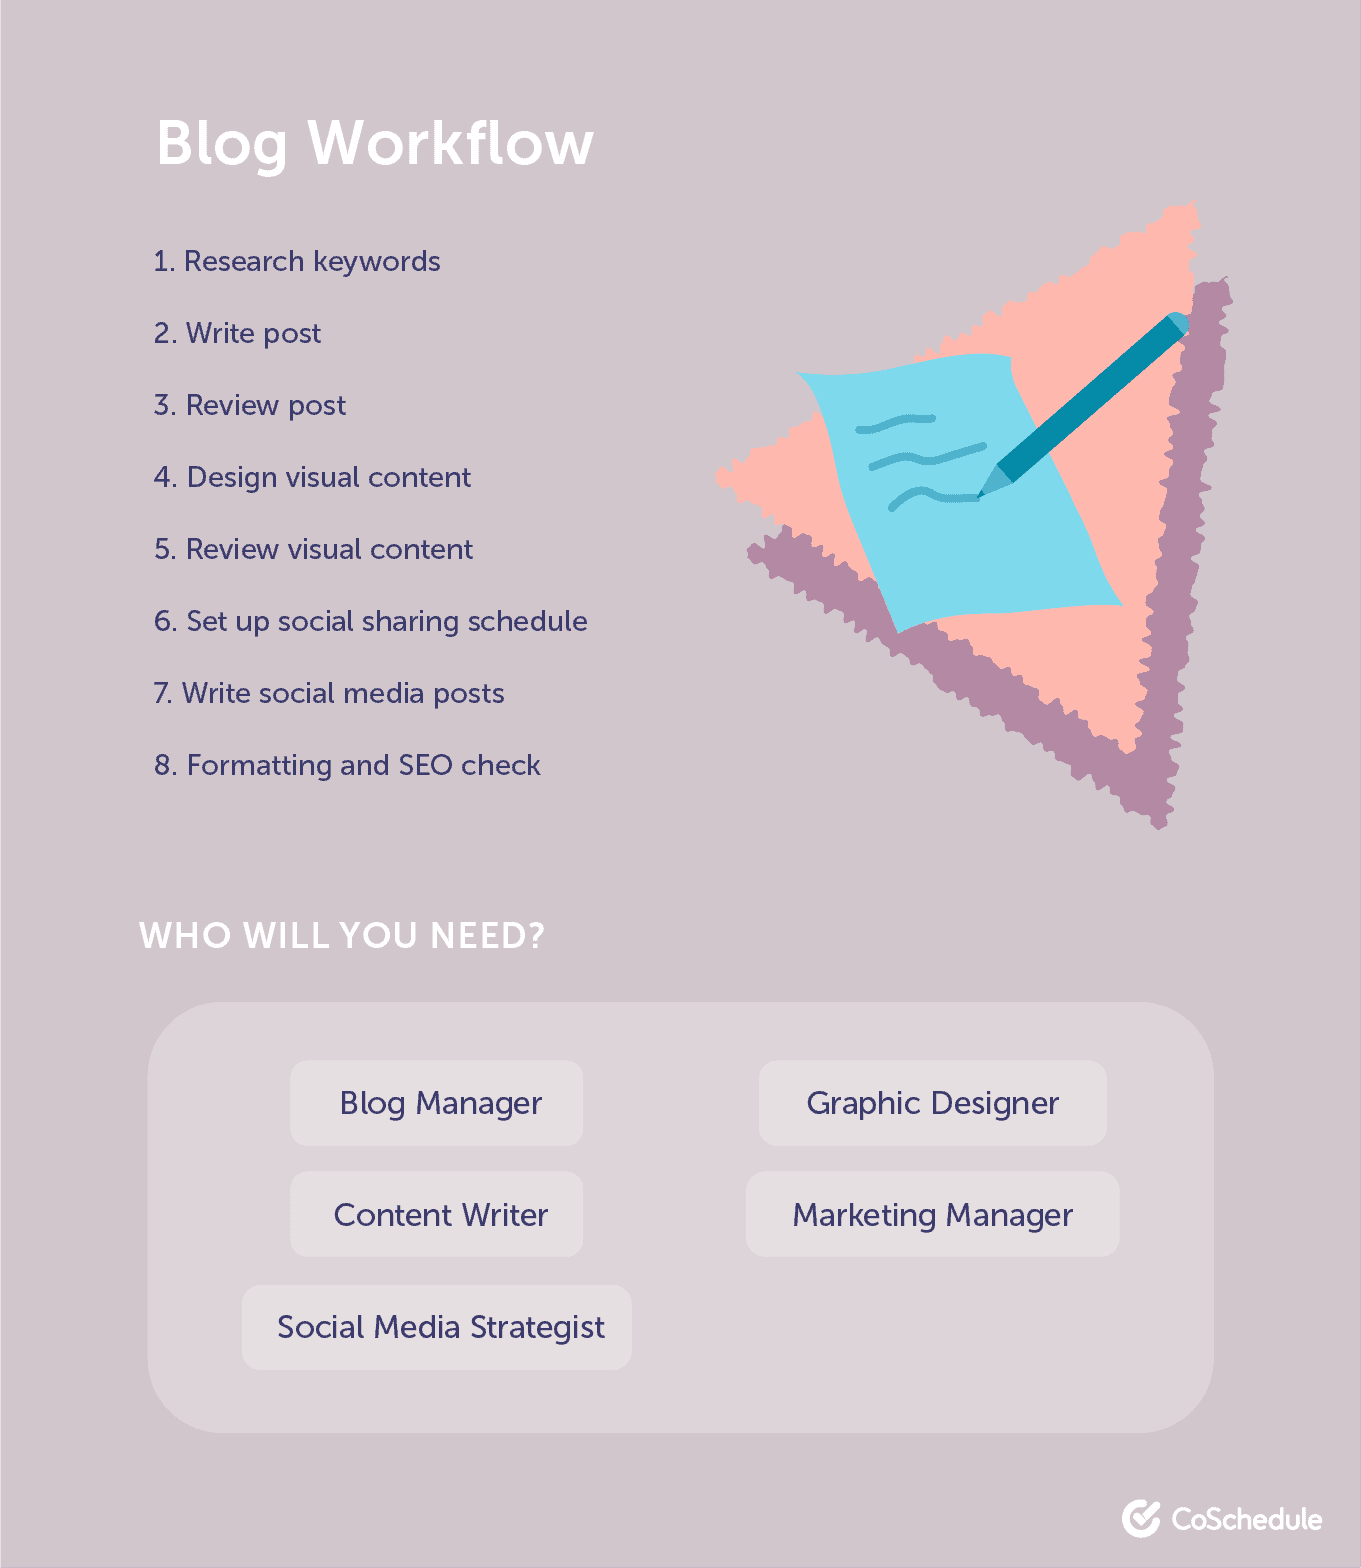 Blow workflow example